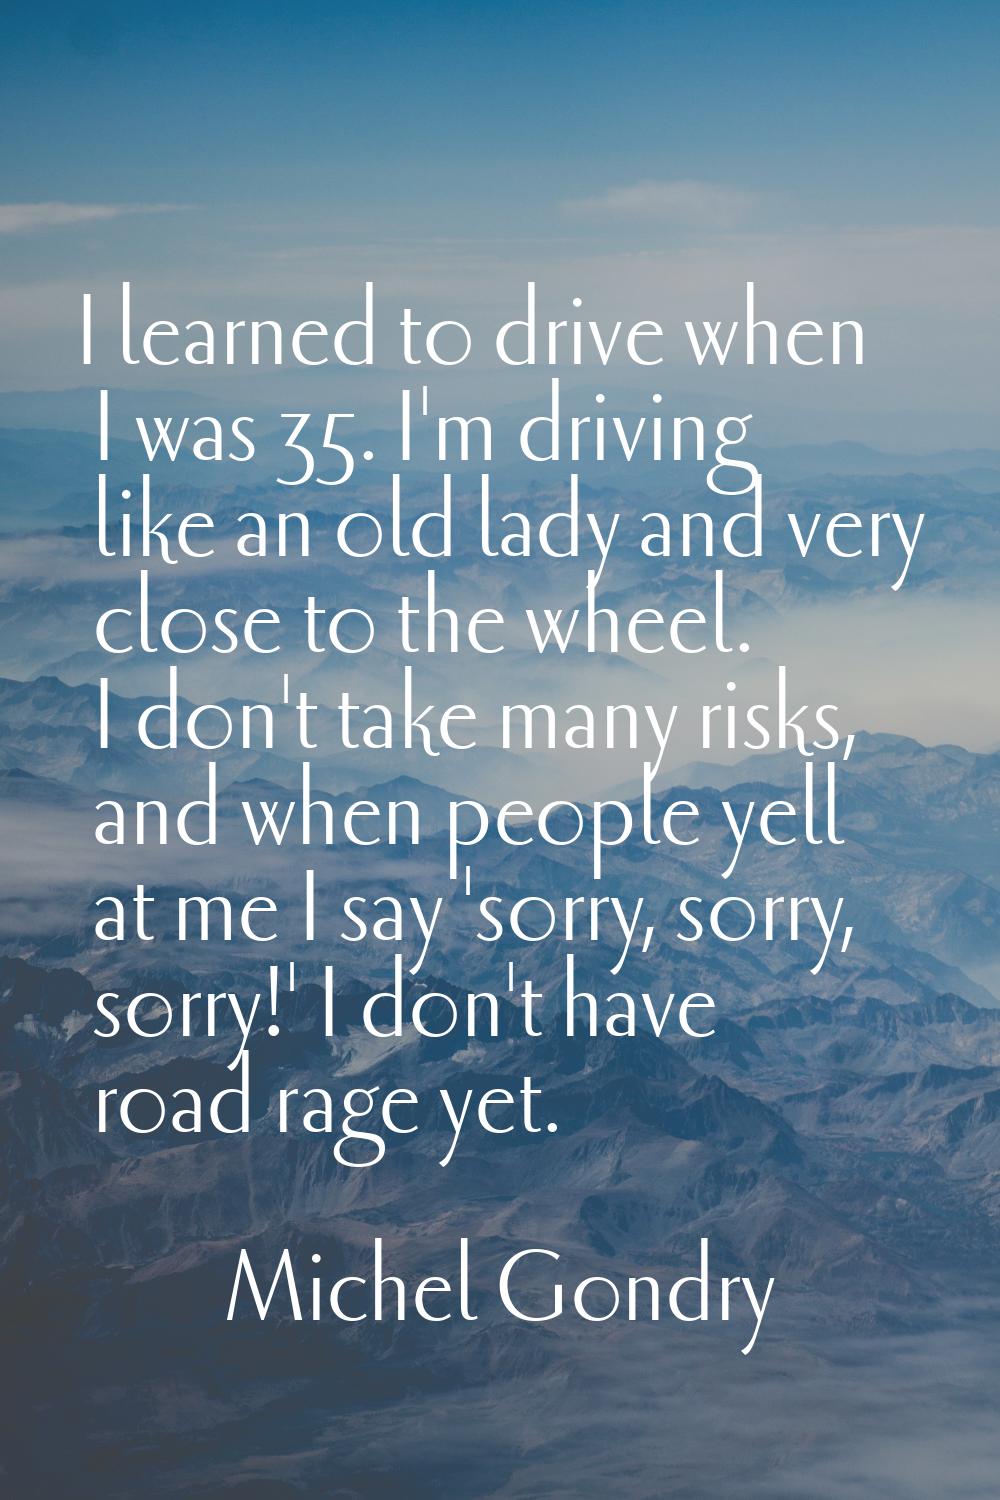 I learned to drive when I was 35. I'm driving like an old lady and very close to the wheel. I don't